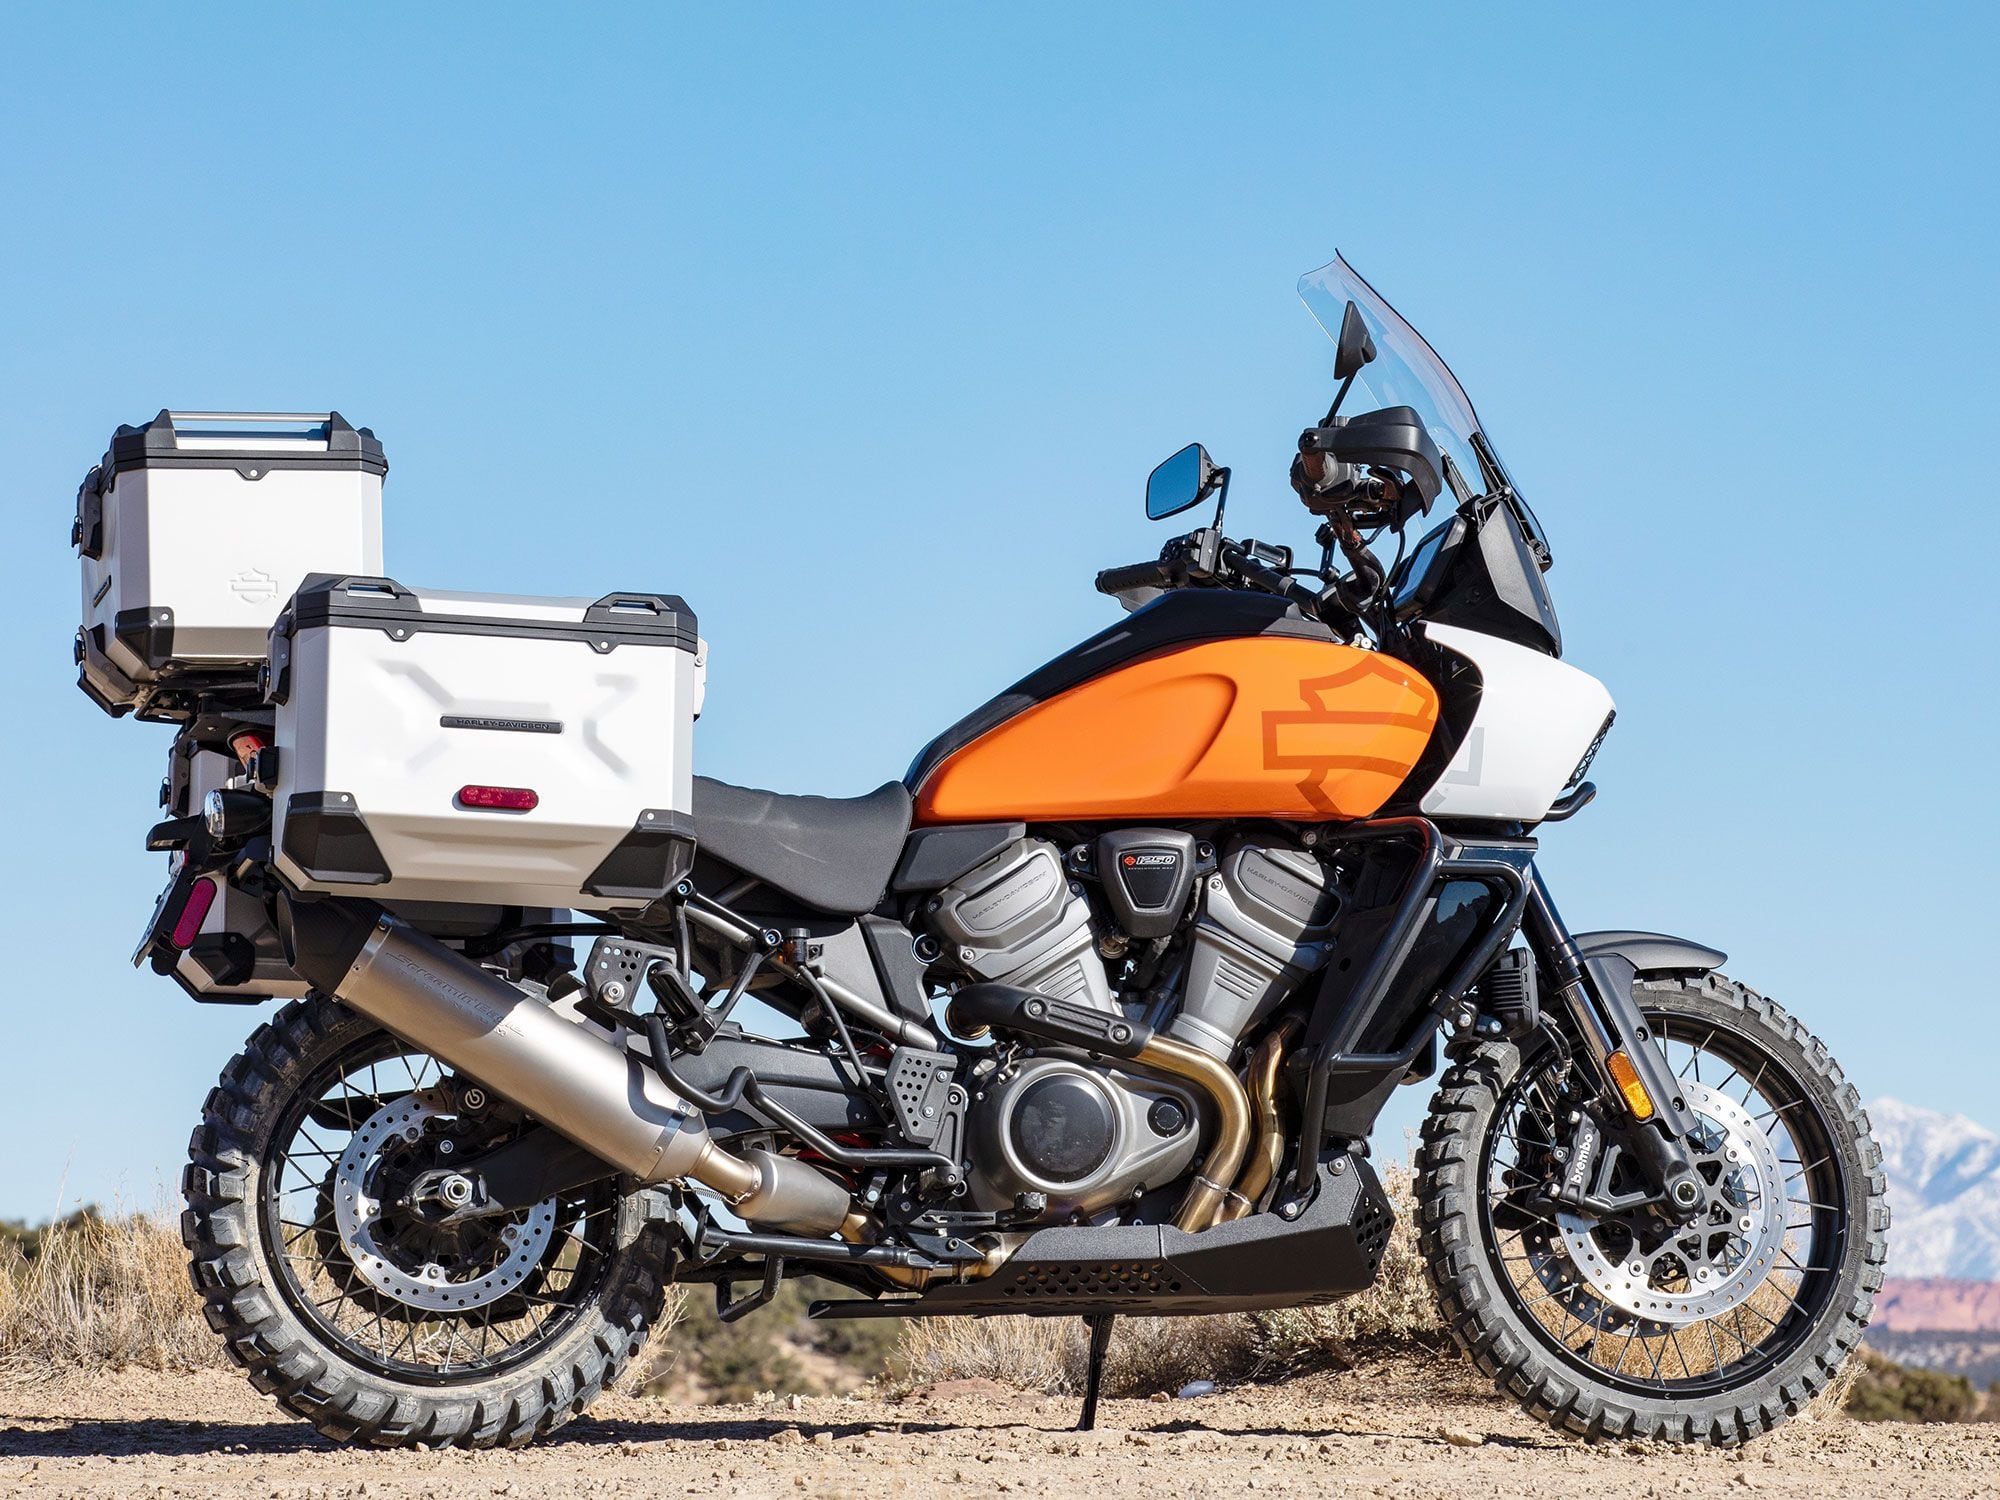 This being a Harley-Davidson product, you’ll be able to farkle out your new 1250 with all manner of available accessories, from aluminum cases to auxiliary lighting to accessory mufflers.